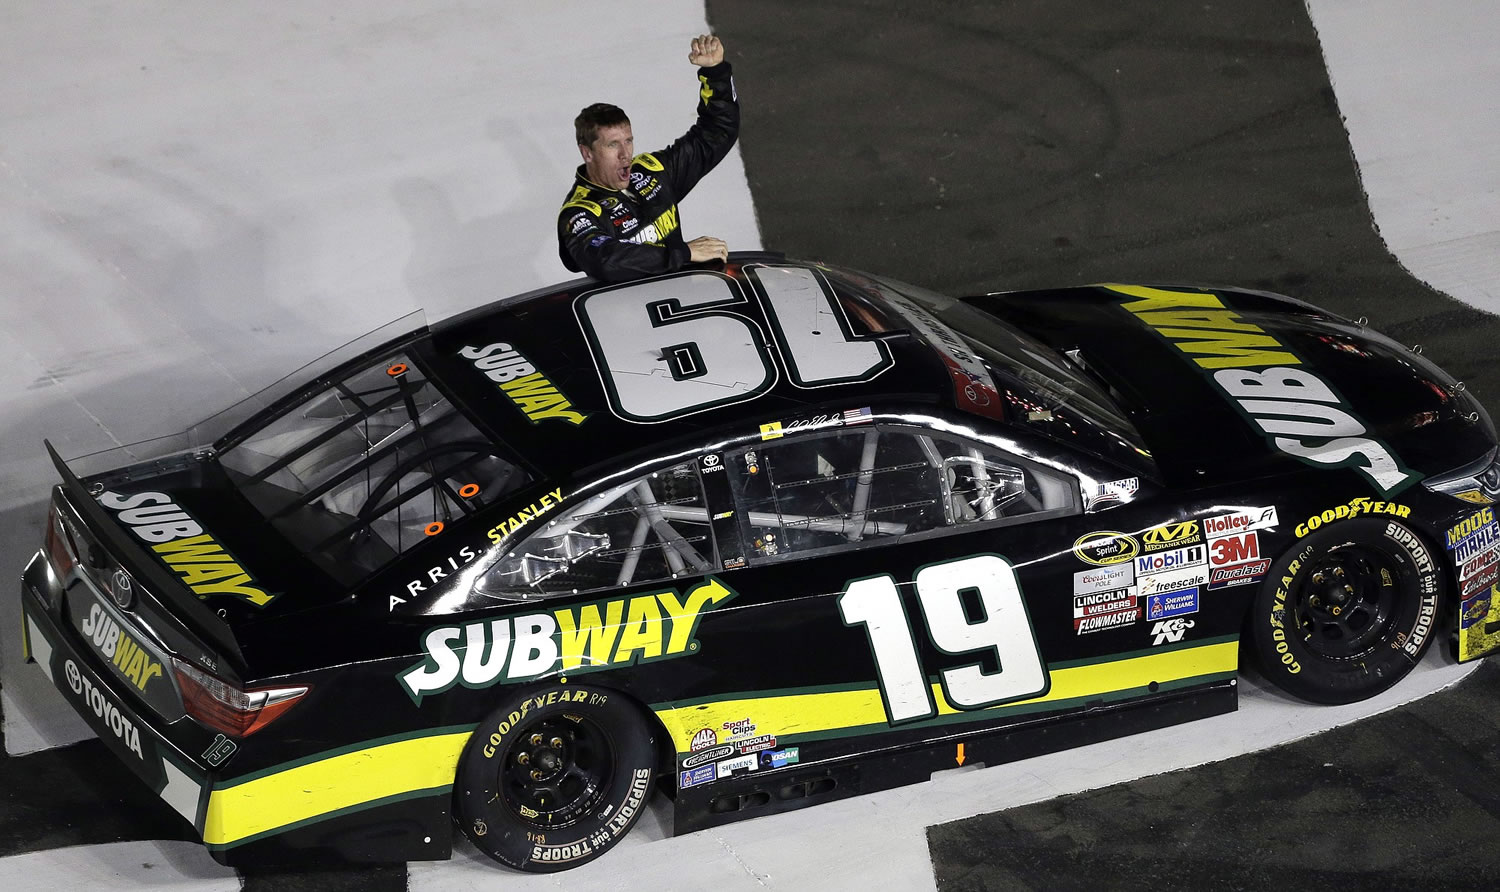 Carl Edwards celebrates after winning the NASCAR Coca-Cola 600 at Charlotte Motor Speedway in Concord, N.C., Sunday, May 24, 2015.